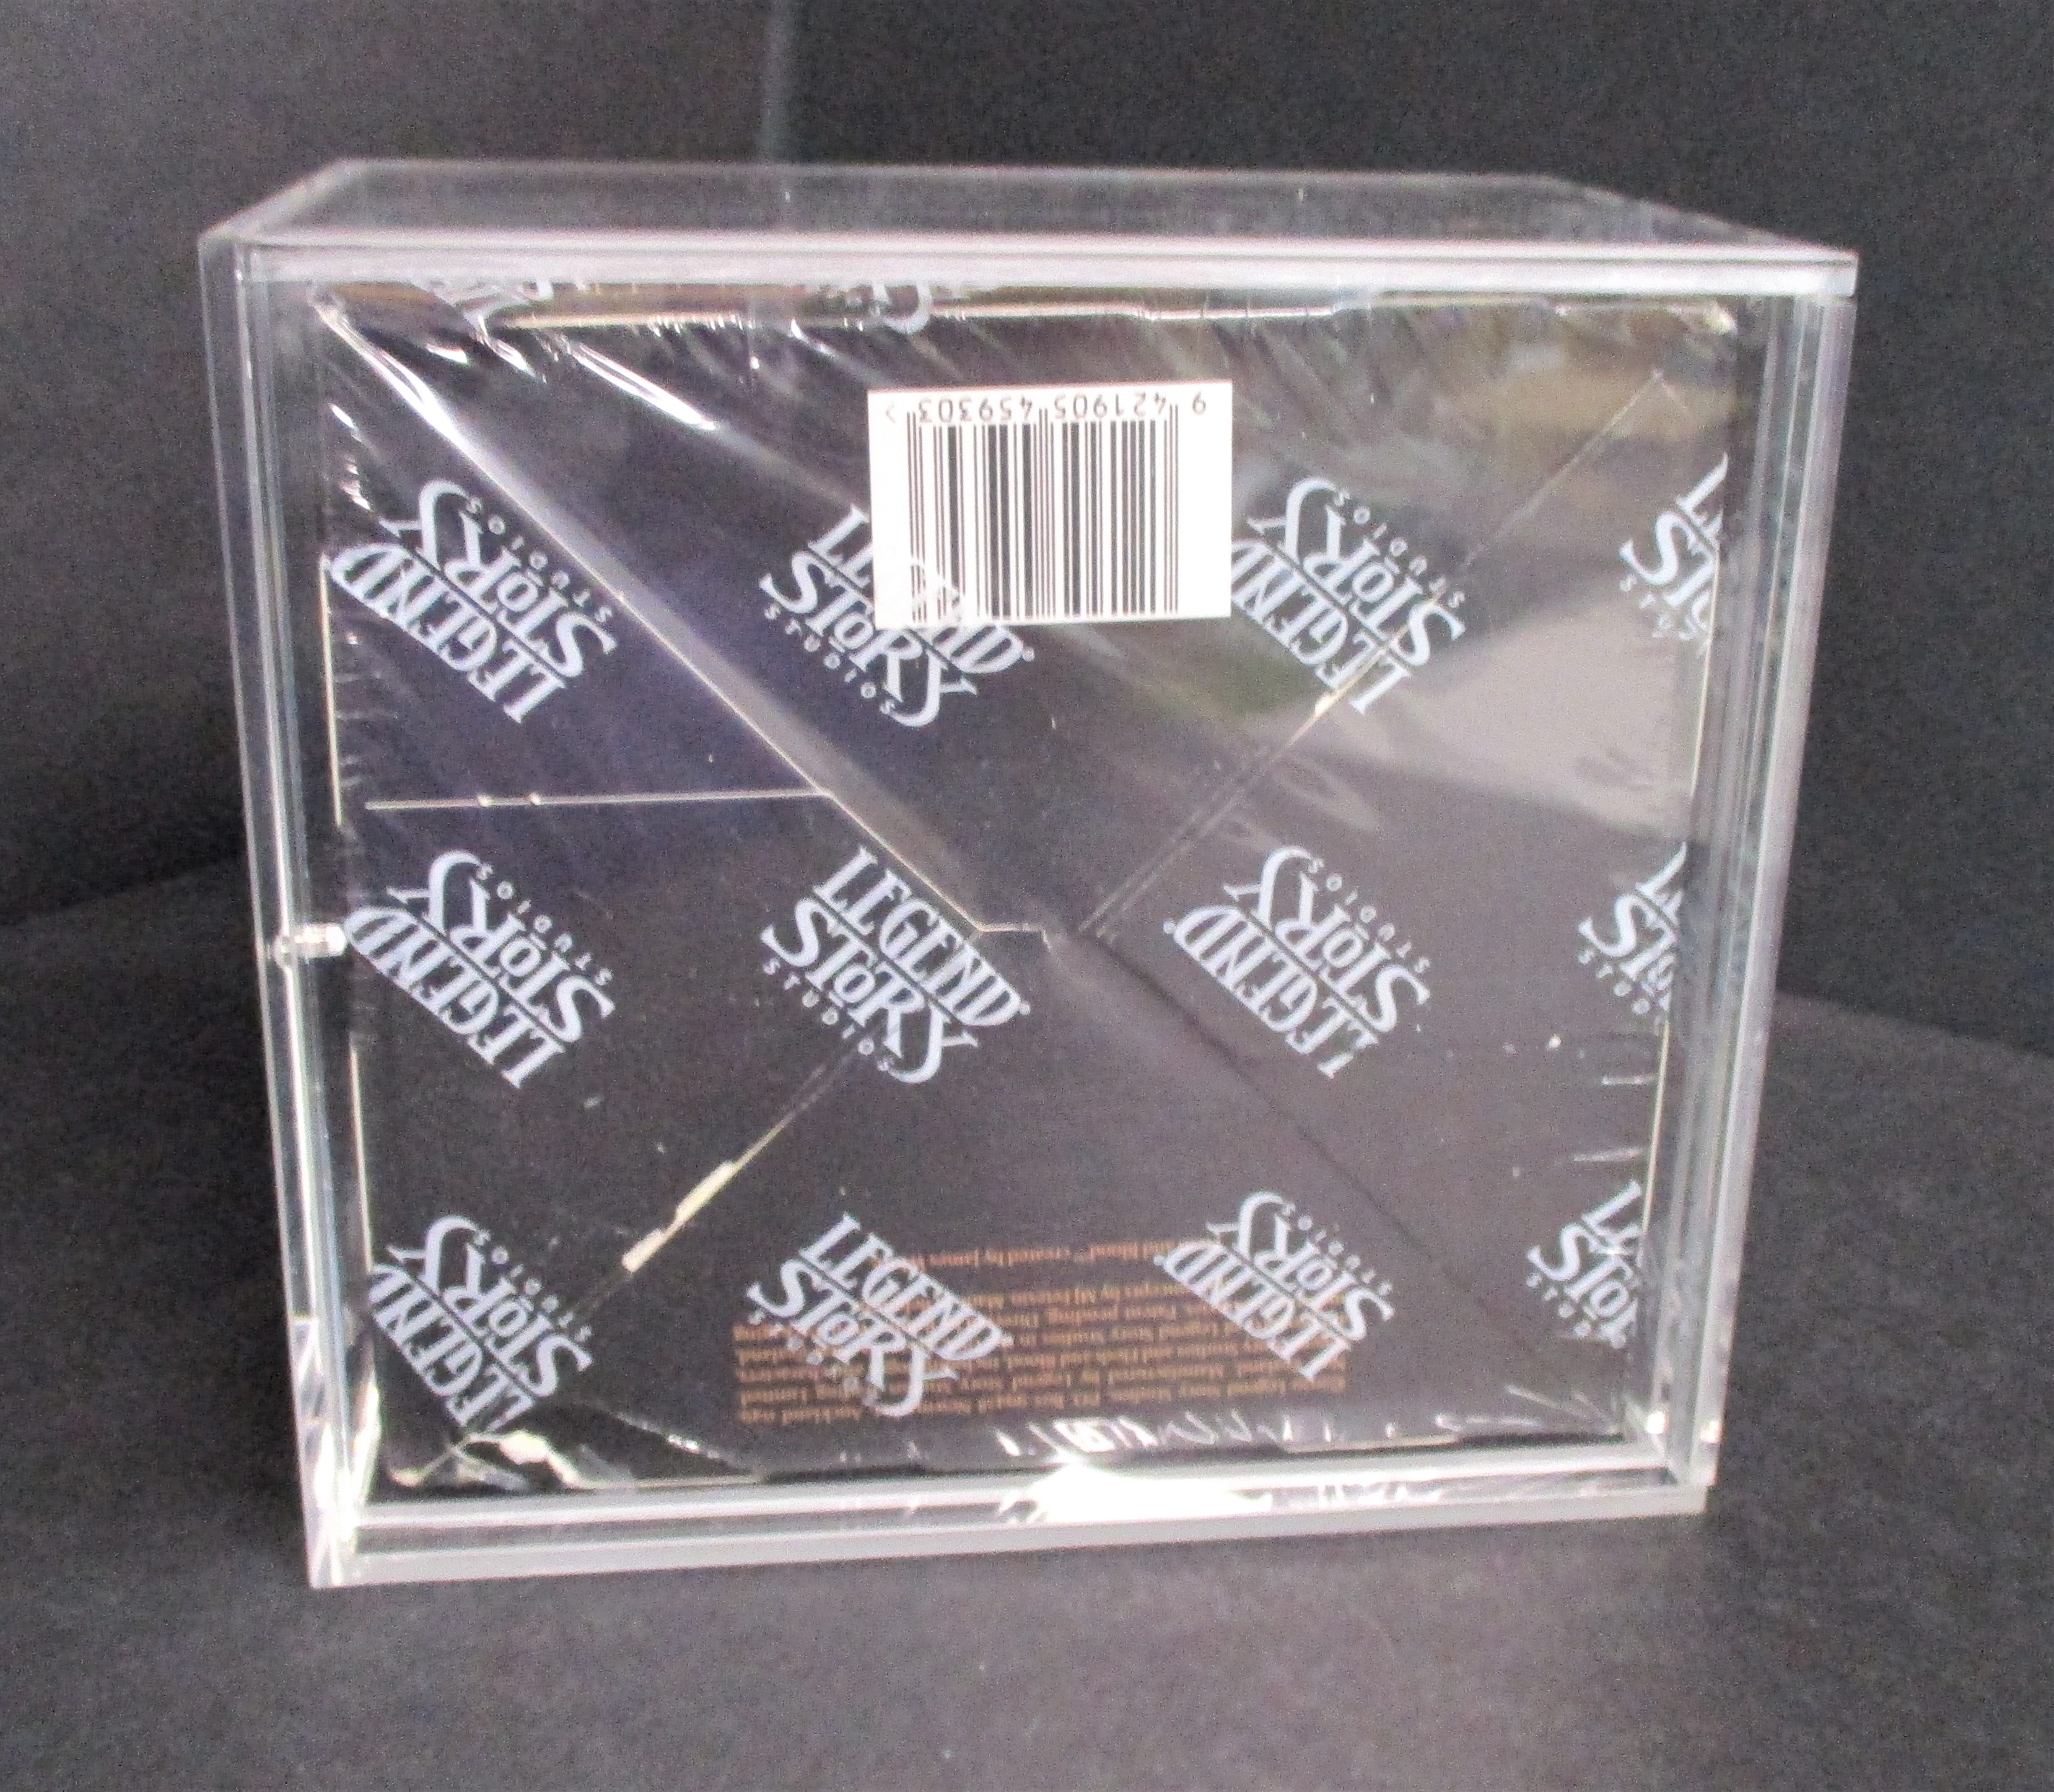 Flesh and Blood Acrylic Booster Box Display 60012 